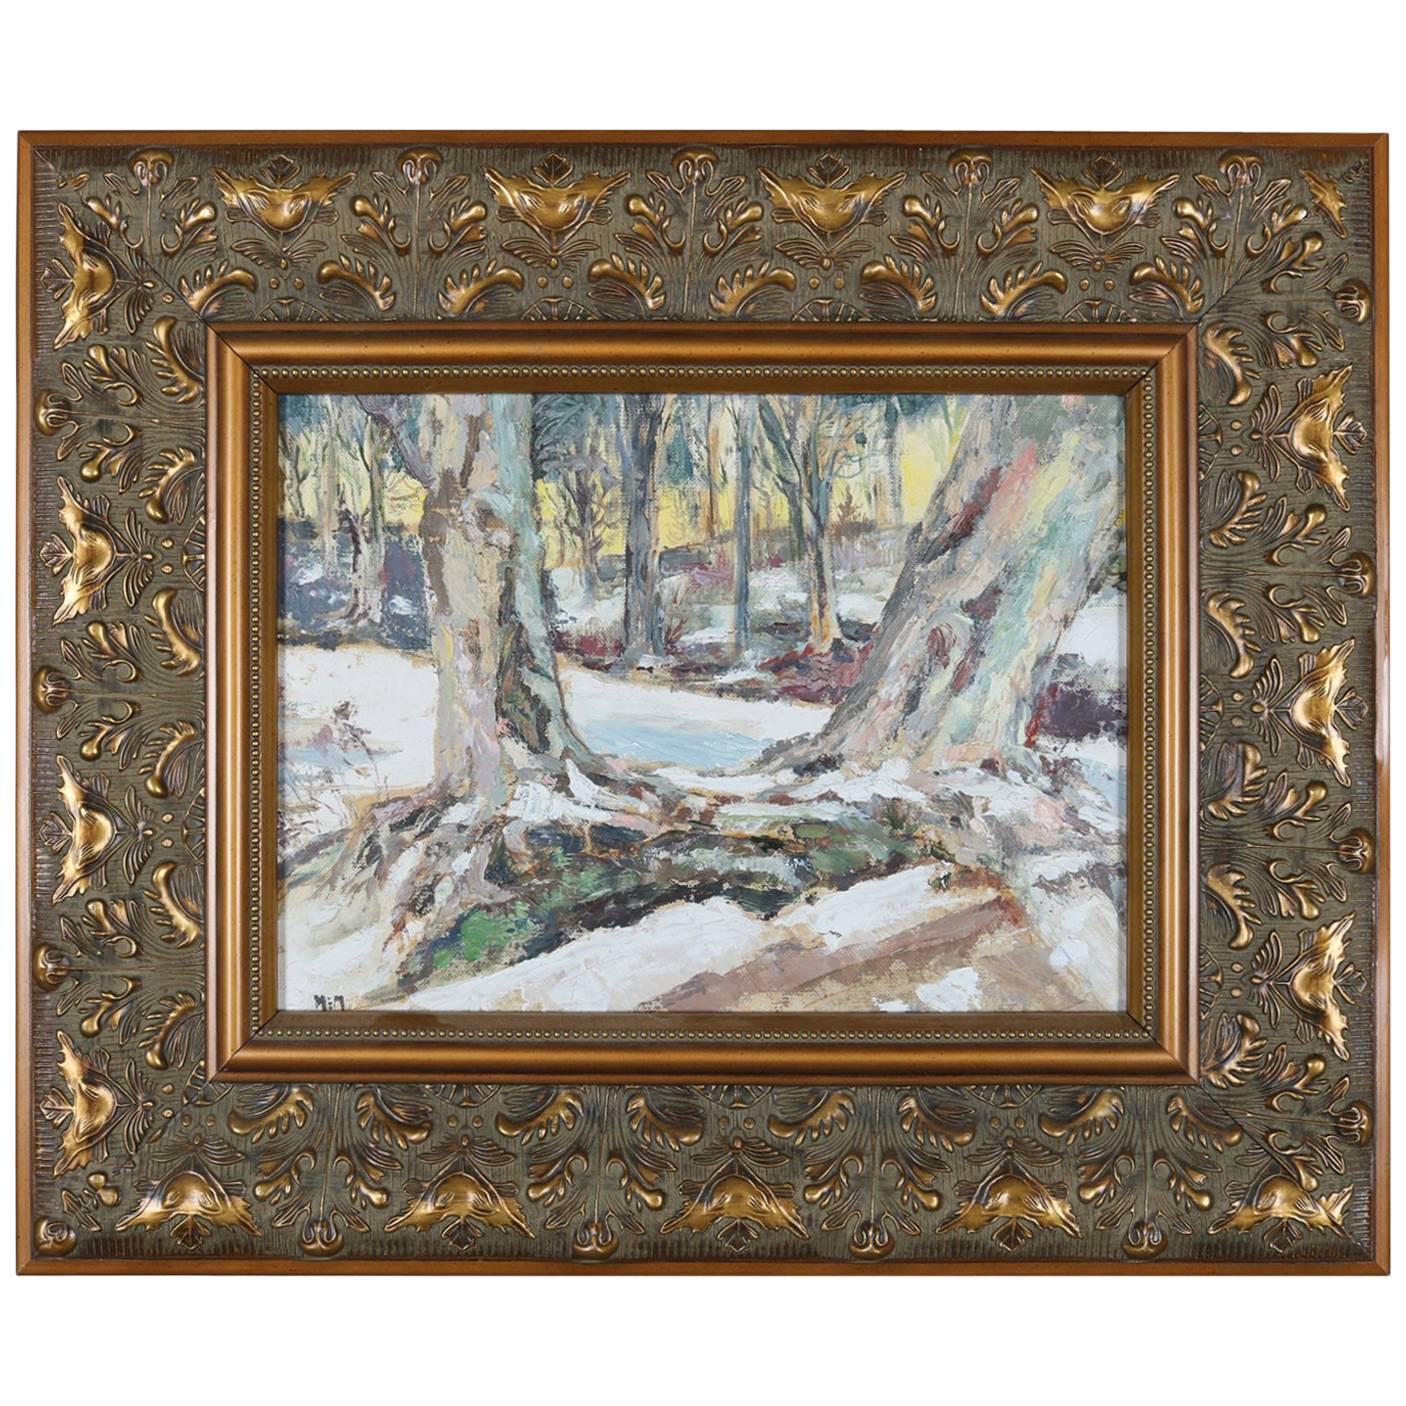 Oil on Canvas Impressionist Landscape Painting of Winter Scene, 20th Century